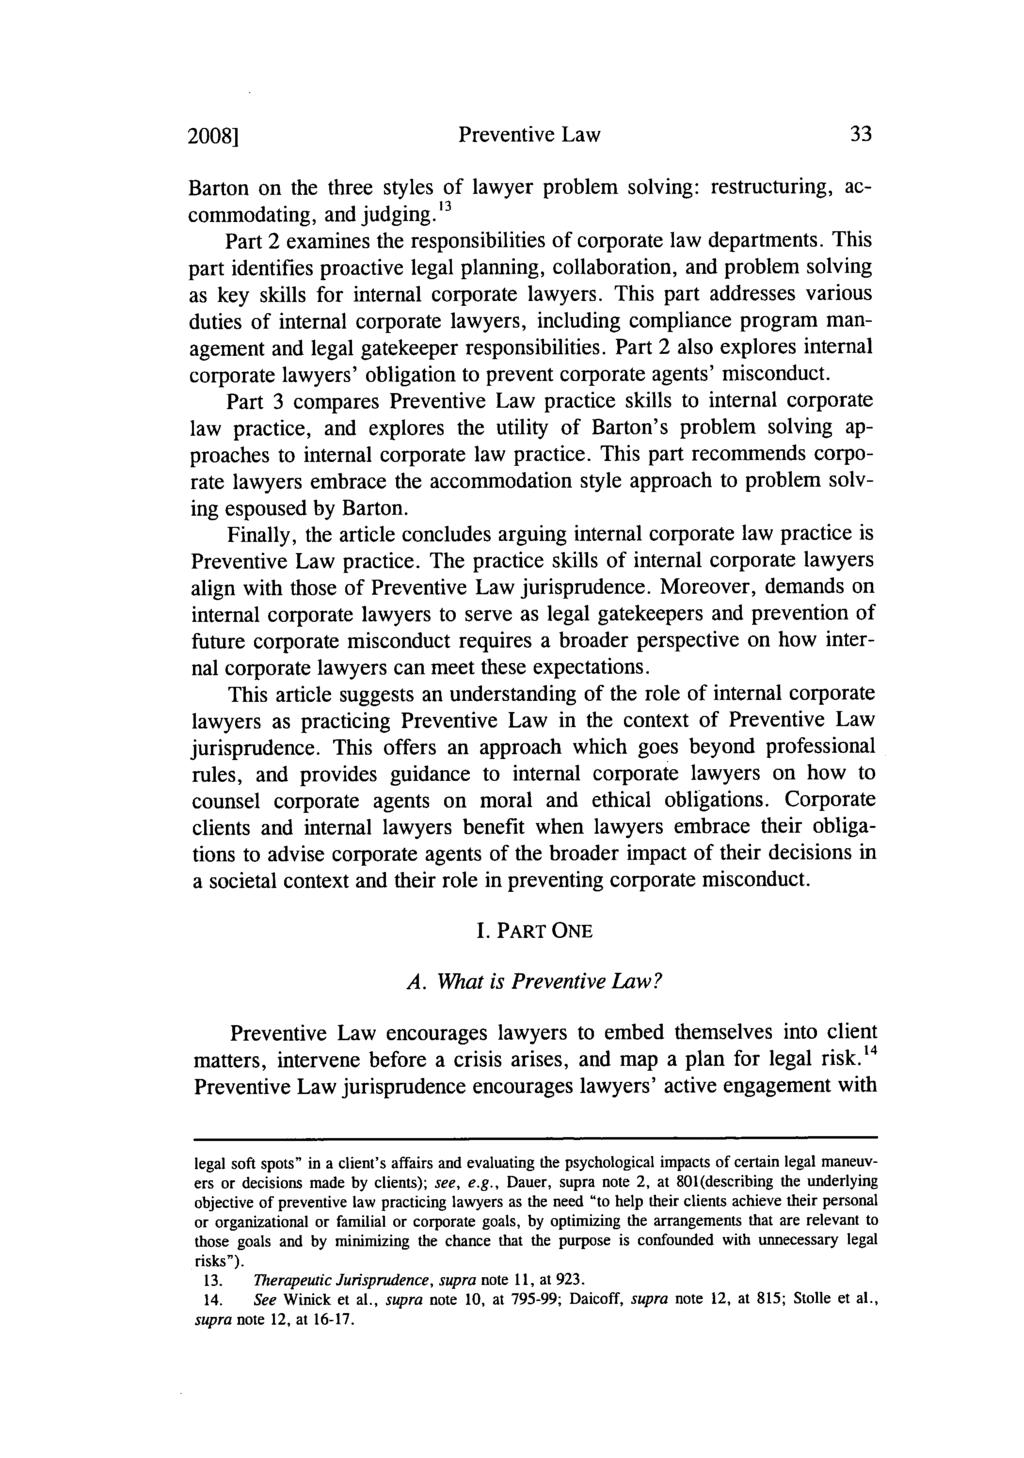 2008] Preventive Law Barton on the three styles of lawyer problem solving: restructuring, accommodating, and judging. 13 Part 2 examines the responsibilities of corporate law departments.